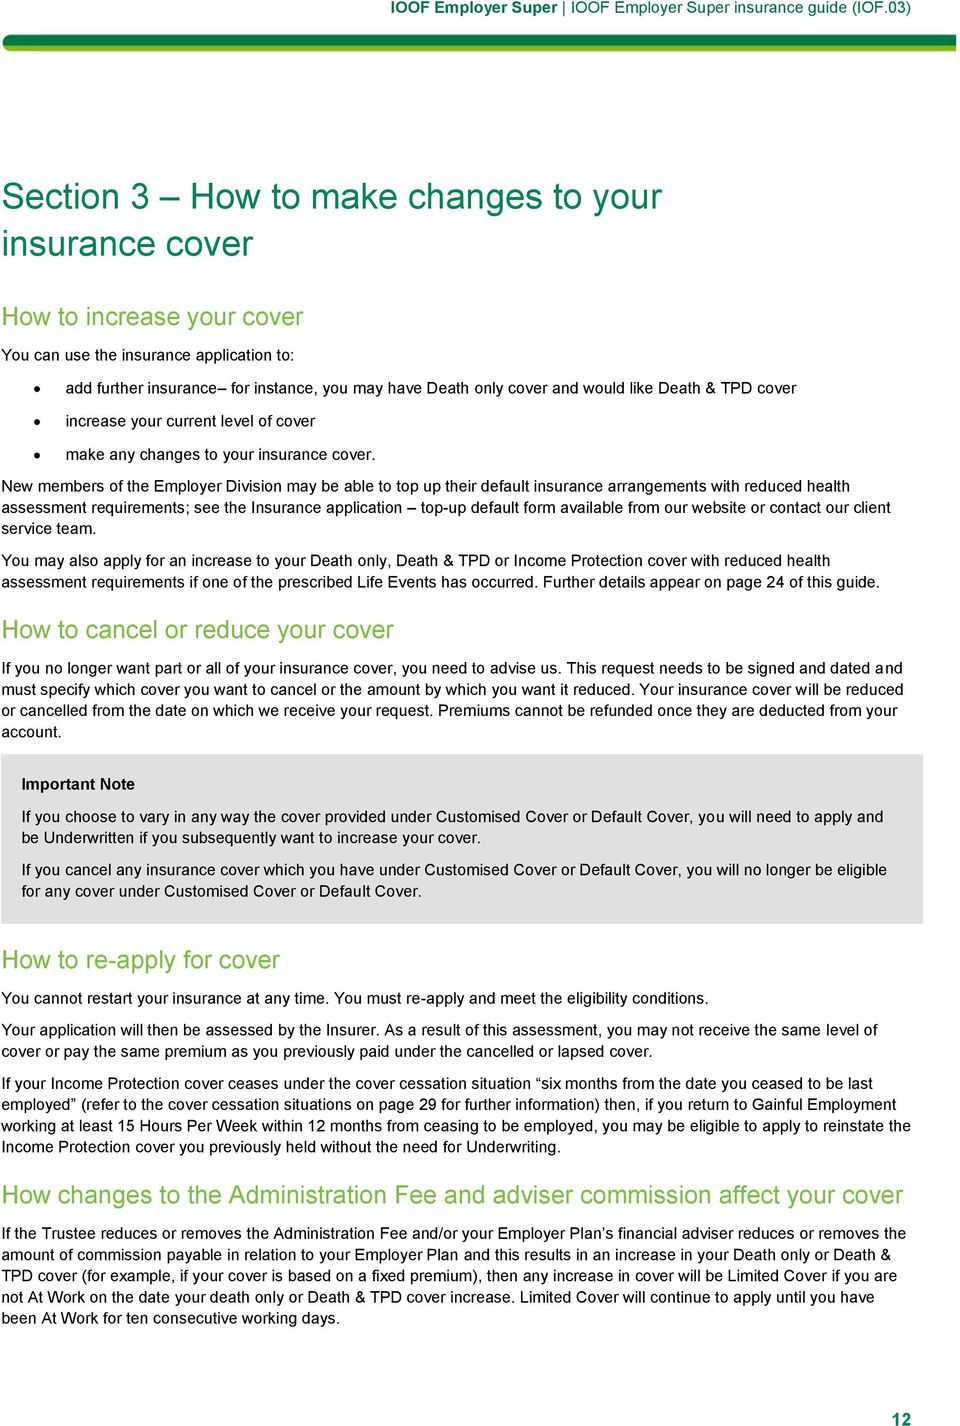 New members of the Employer Division may be able to top up their default insurance arrangements with reduced health assessment requirements; see the Insurance application top-up default form